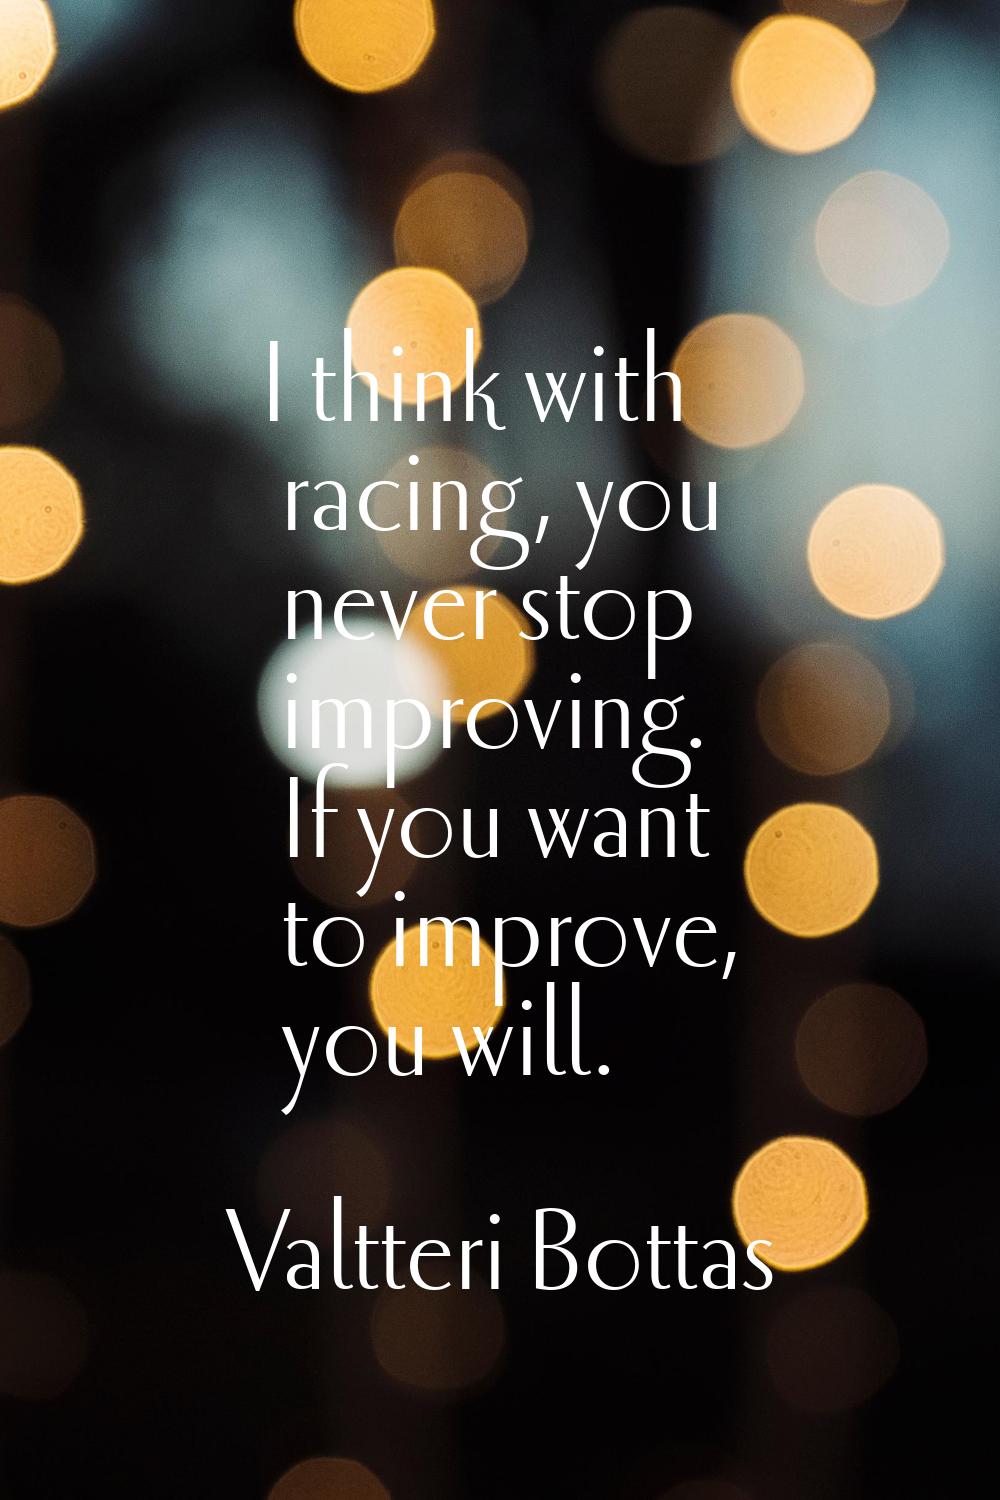 I think with racing, you never stop improving. If you want to improve, you will.